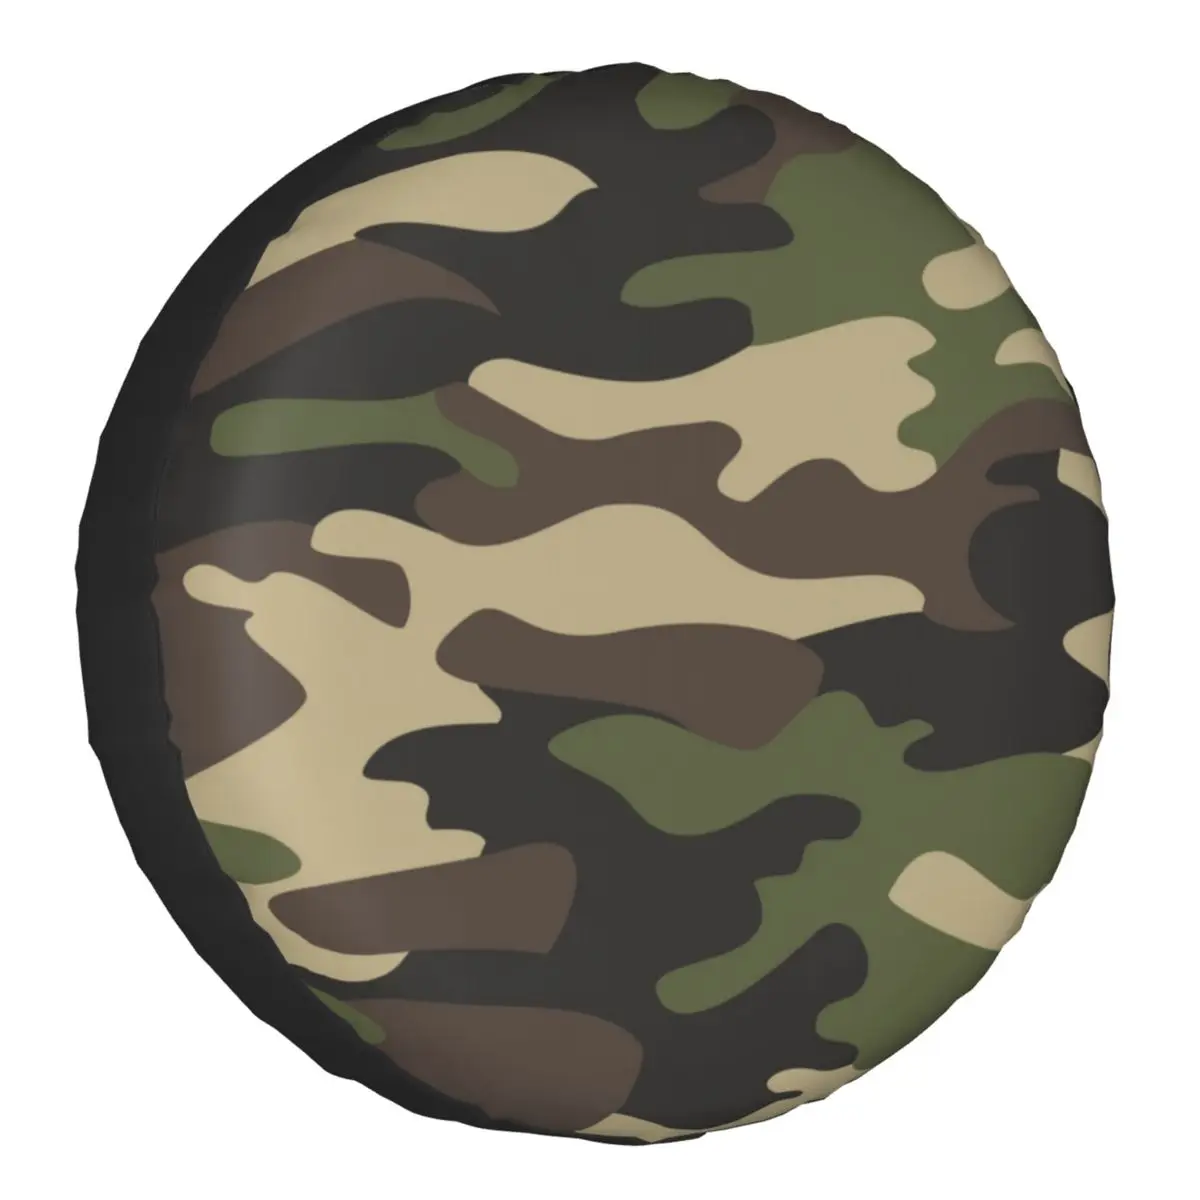 

Green Brown Military Camouflage Spare Wheel Tire Cover for Toyota Land Cruiser Prado Army Jungle Camo RV SUV 4WD Vehicle